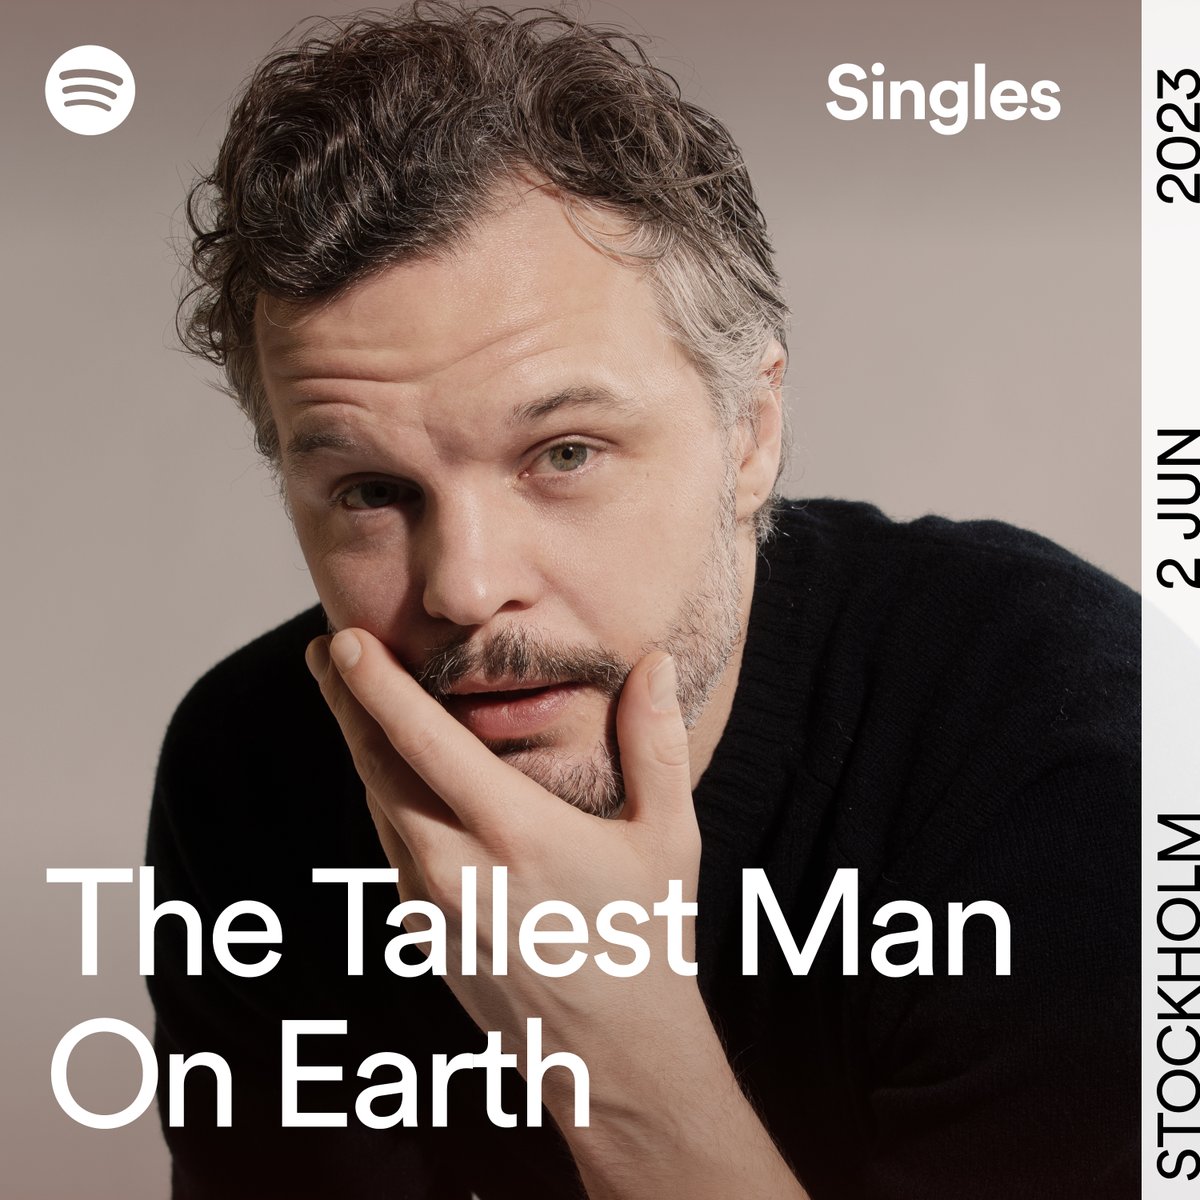 .@Spotify Singles: “Looking For Love” + a rendition of James Blake’s “Say What You Will” recorded in the Spotify Studios in Stockholm. Listen now on Spotify: thetallestmanonearth.ffm.to/spotifysingles